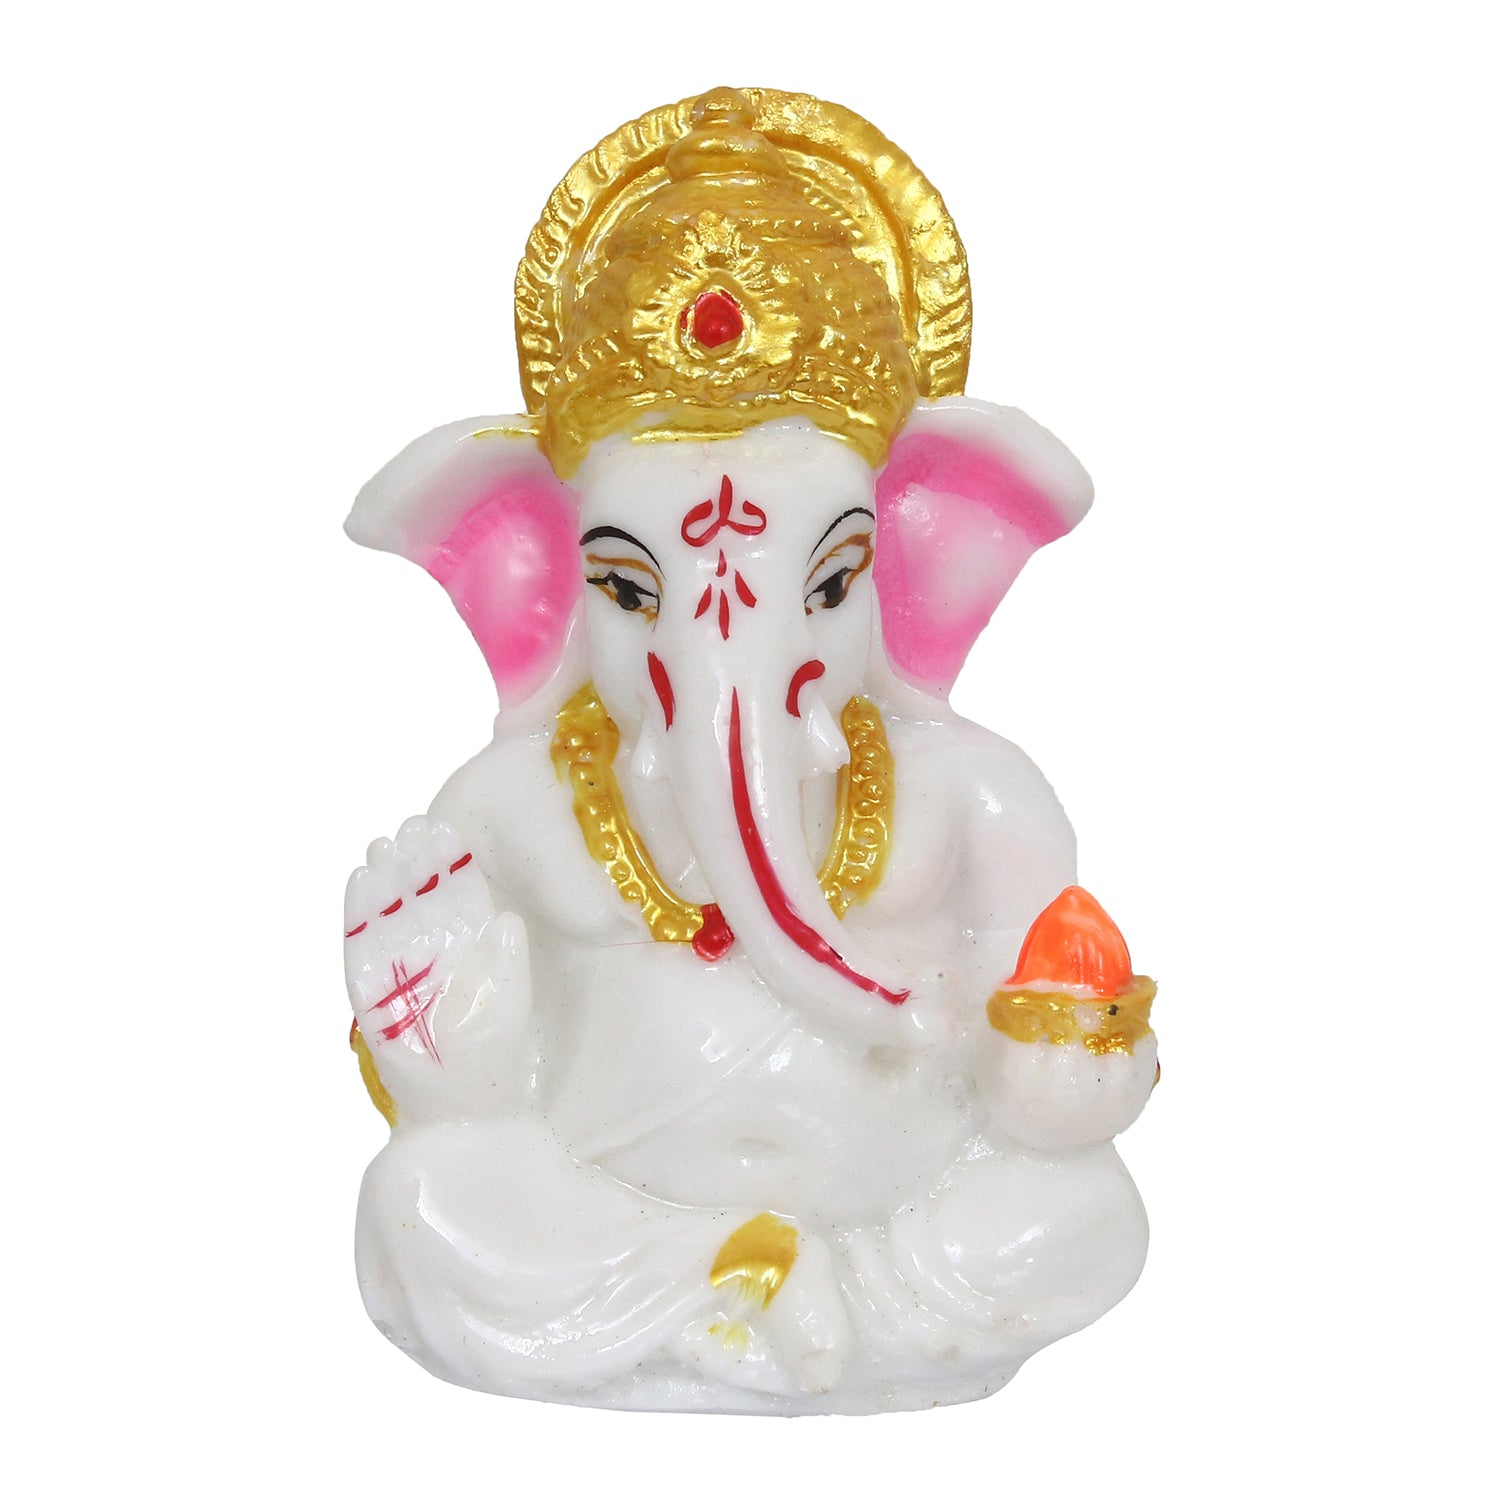 Decorative Lord Ganesha Idol for Car Dashboard, Home Temple and Office Desks 2